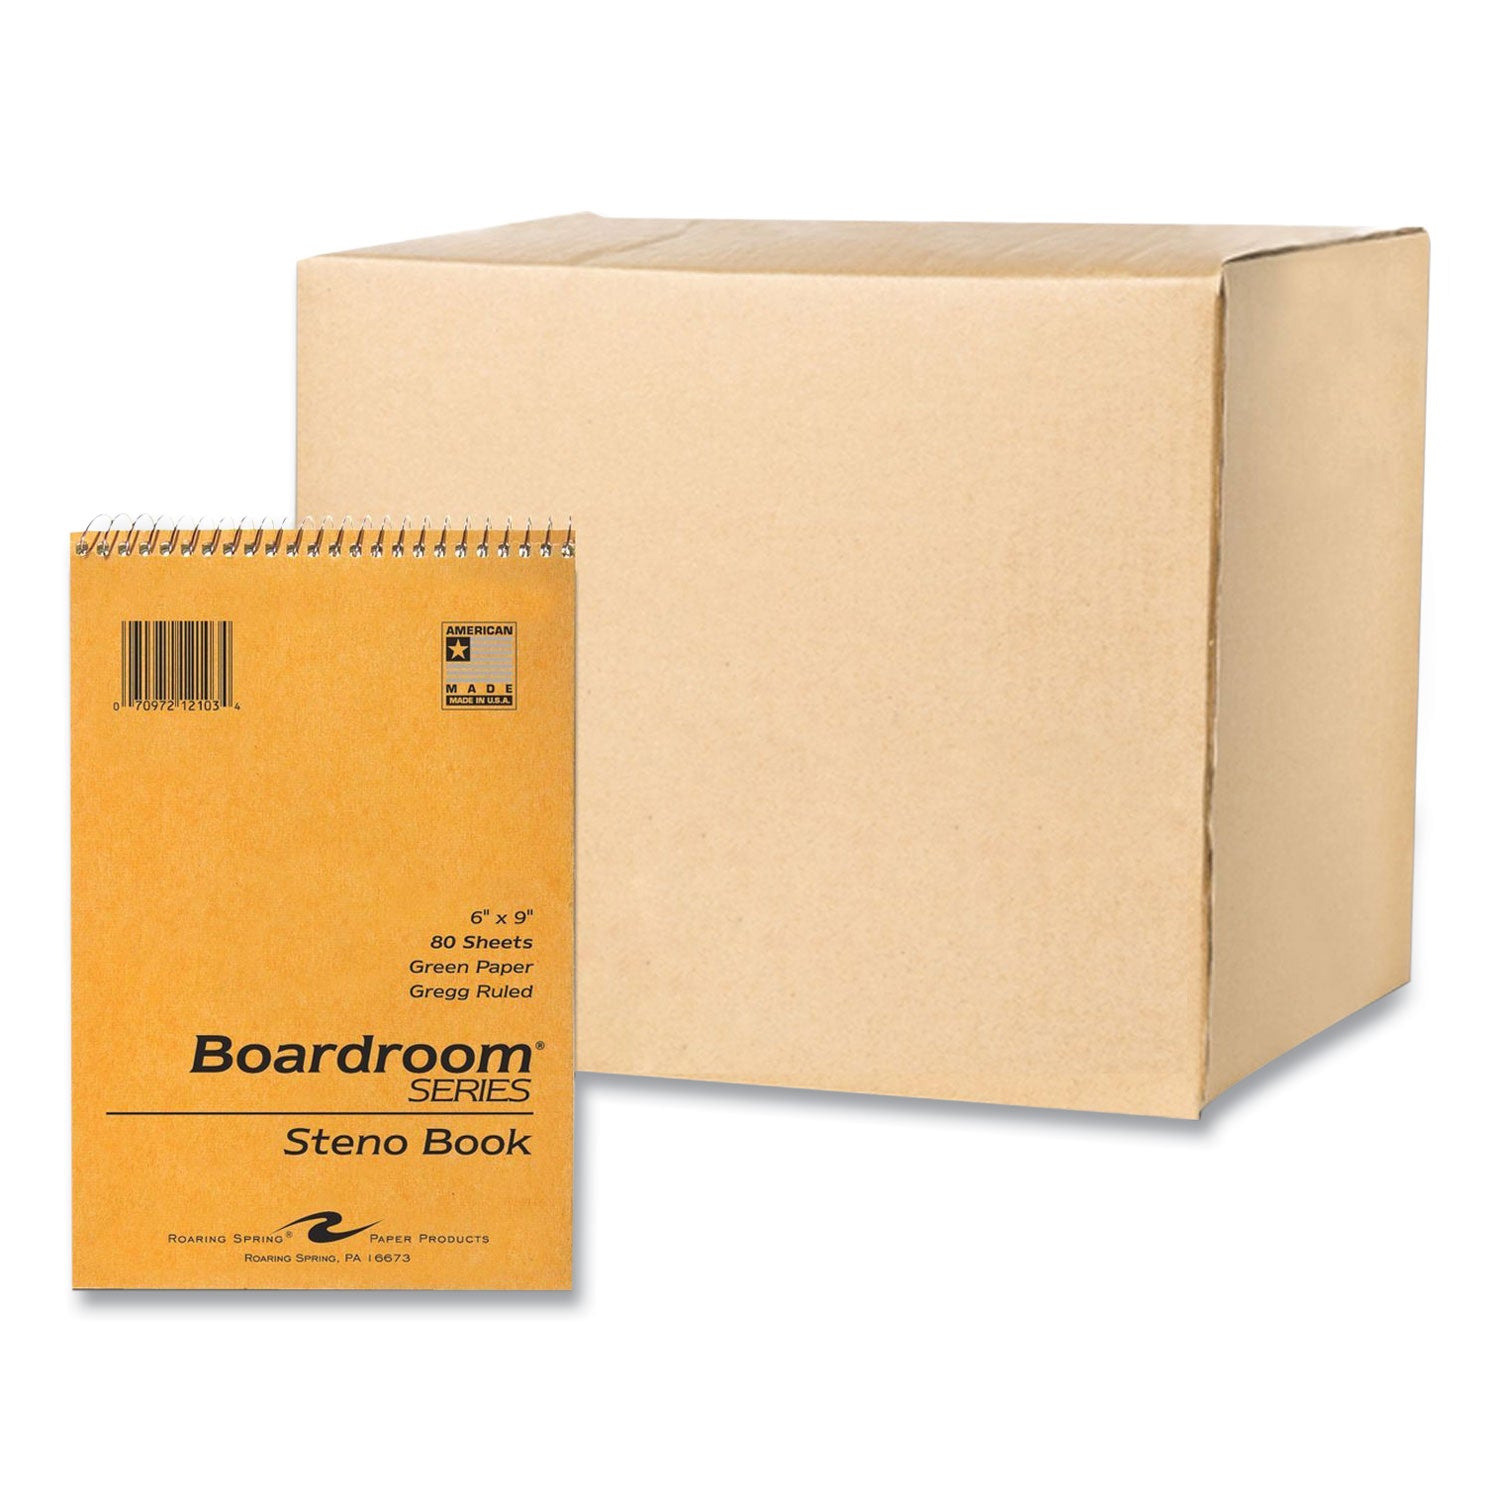 boardroom-series-steno-pad-gregg-ruled-brown-cover-80-green-6-x-9-sheets-72-pads-carton-ships-in-4-6-business-days_roa12103cs - 2